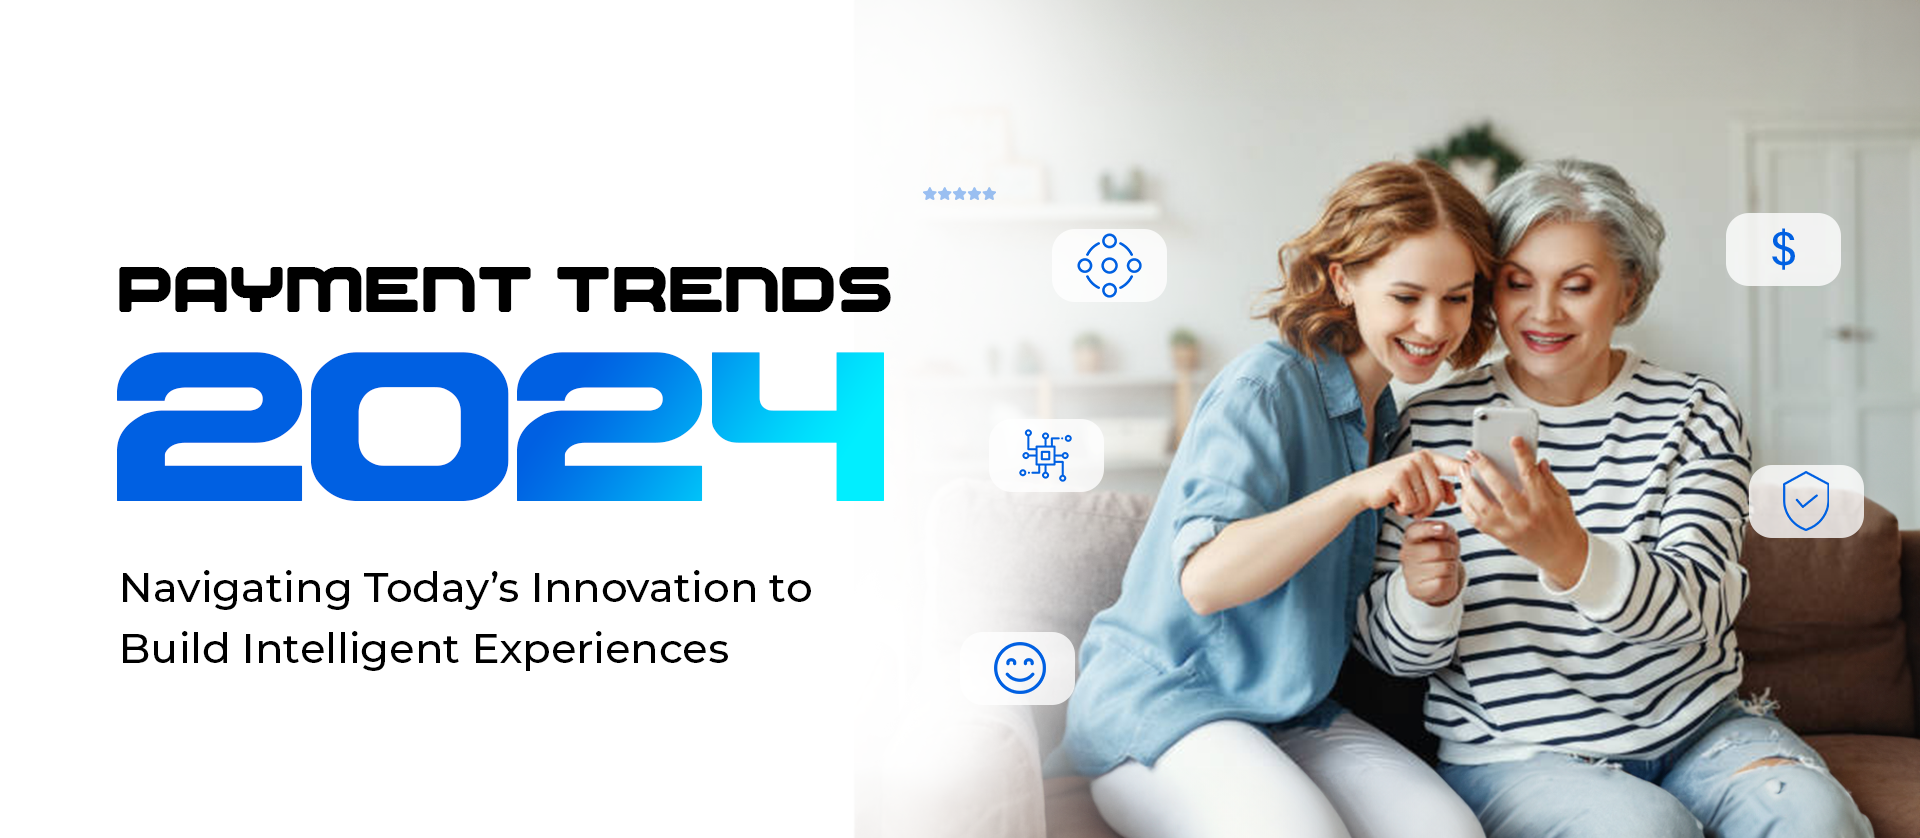 Payment Trends 2024: Navigating Today’s Innovation to Build Intelligent Experiences